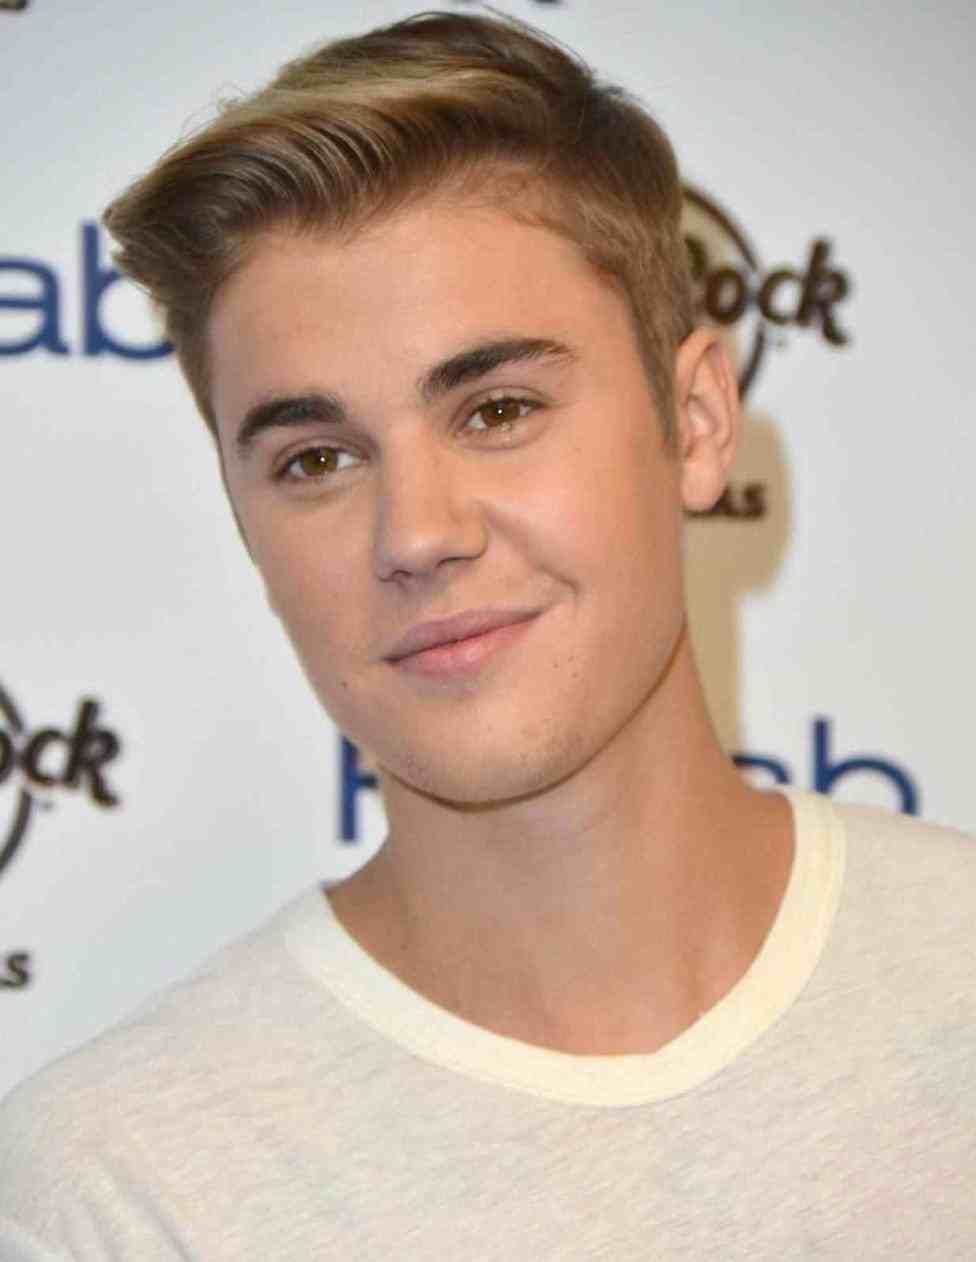 balayagehair.club -&nbspThis website is! -&nbspbalayagehair Resources and Information. Justin bieber, Hairstyle, Justin